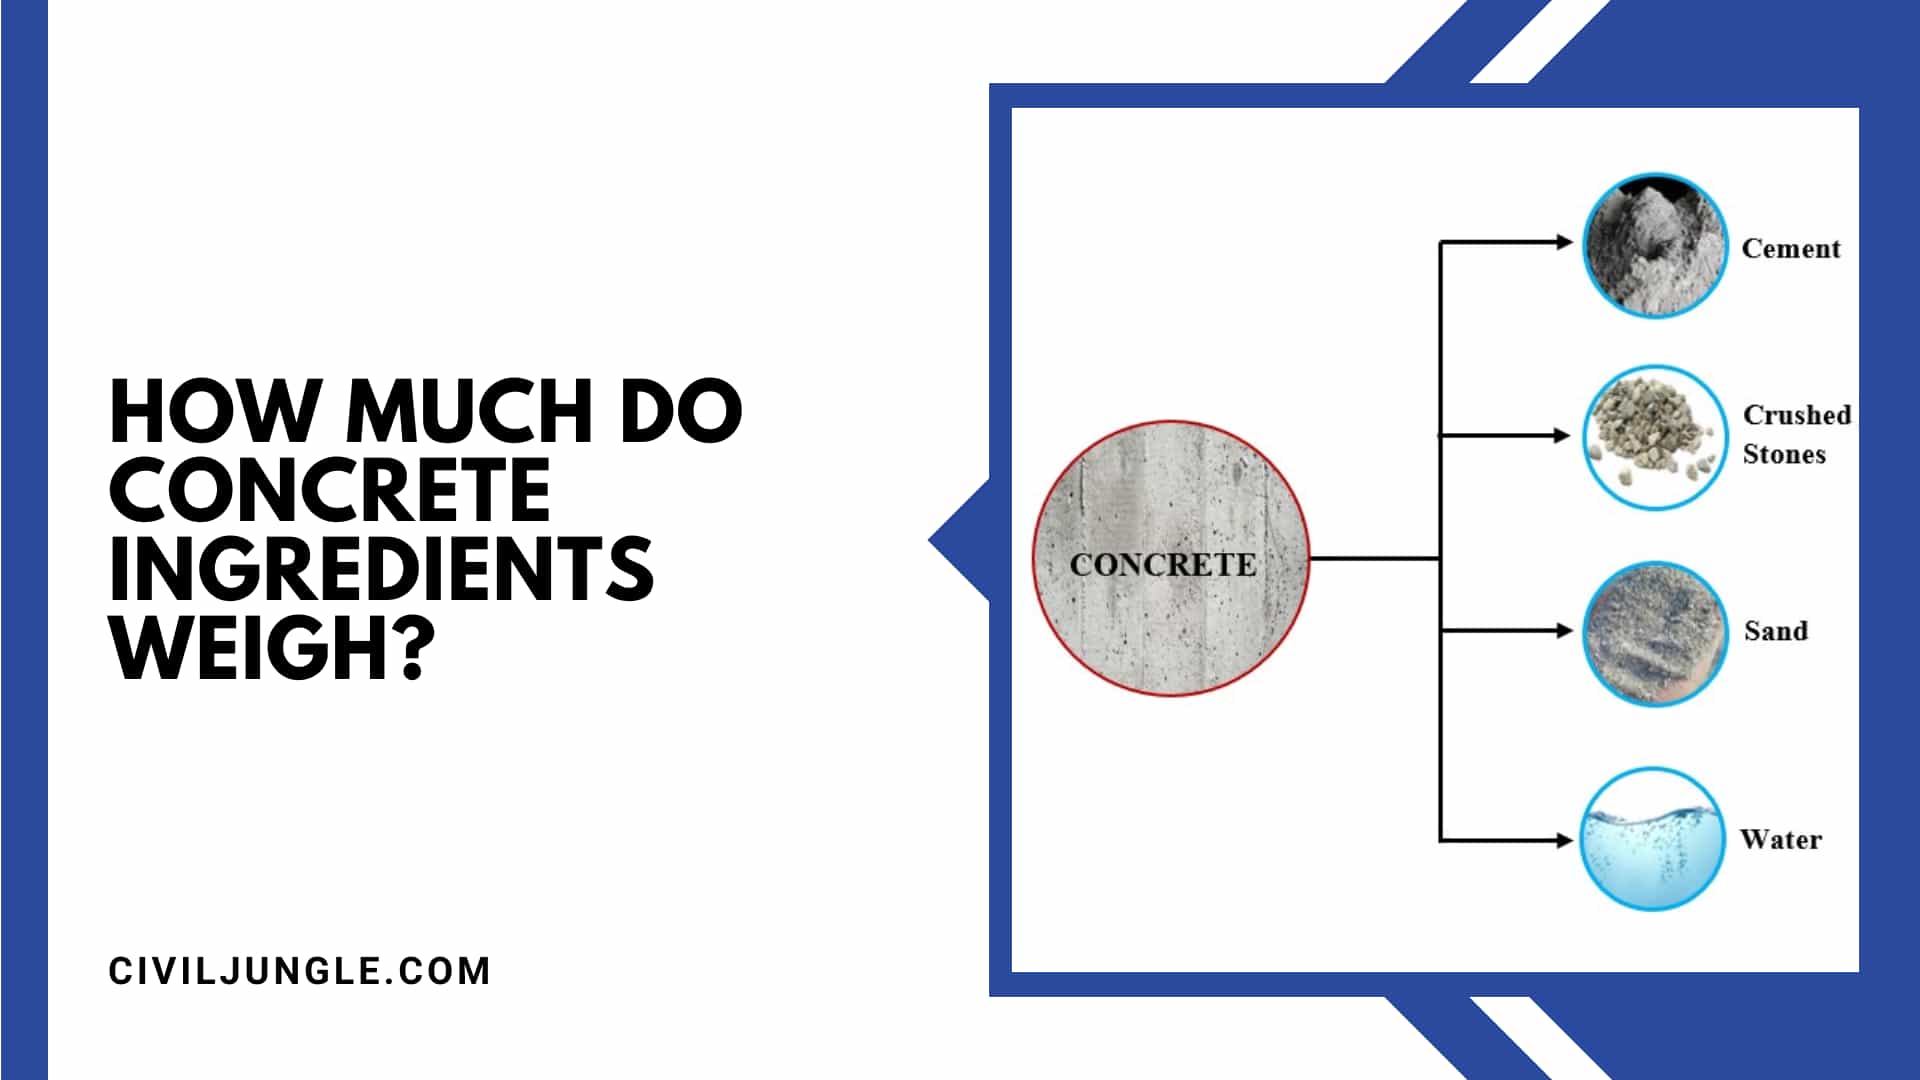 How Much Do Concrete Ingredients Weigh?